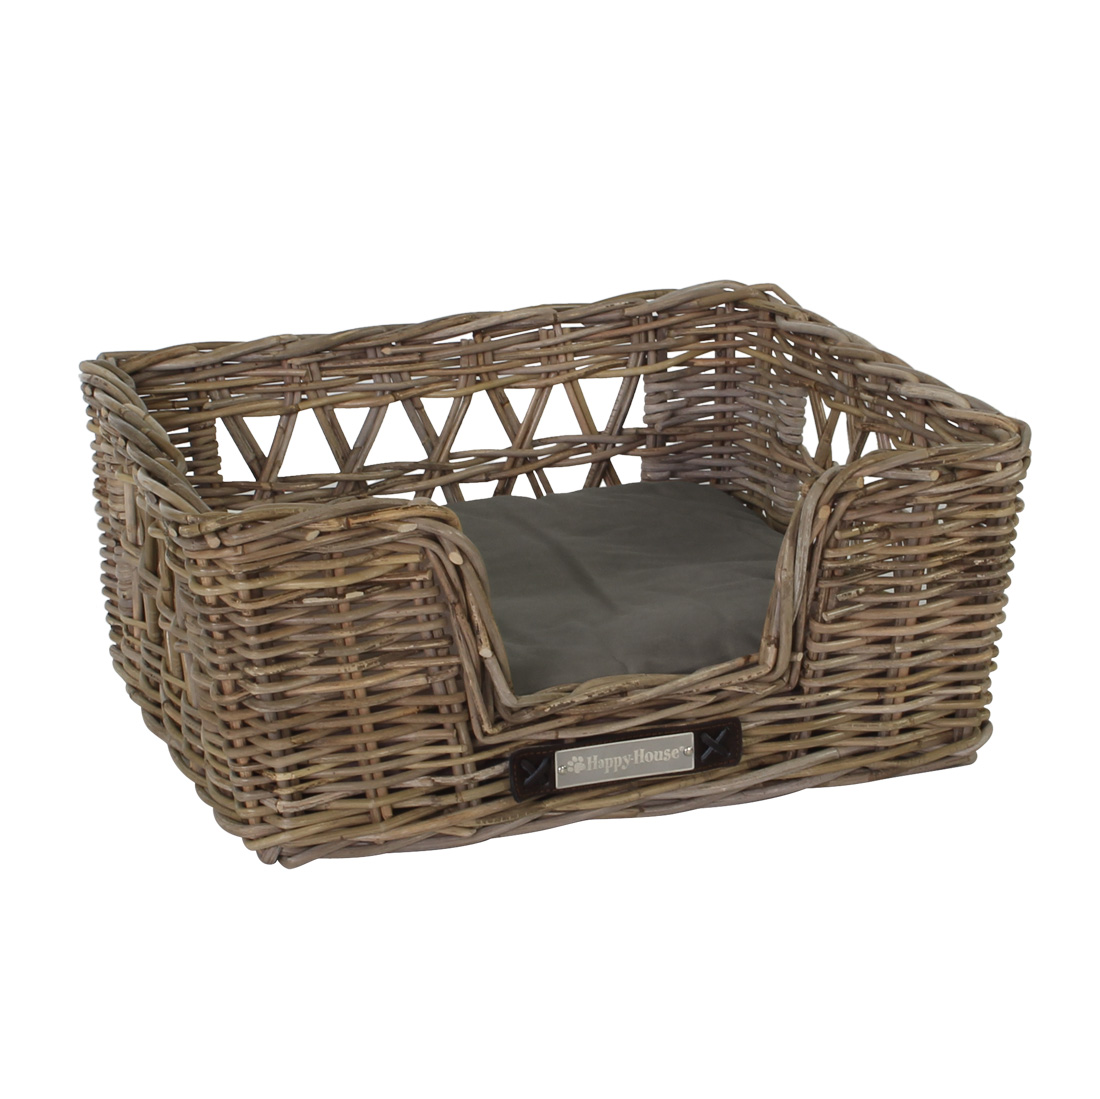 classical dogbasket deluxe open braided rattan s rectangular luxury outdoor pillow